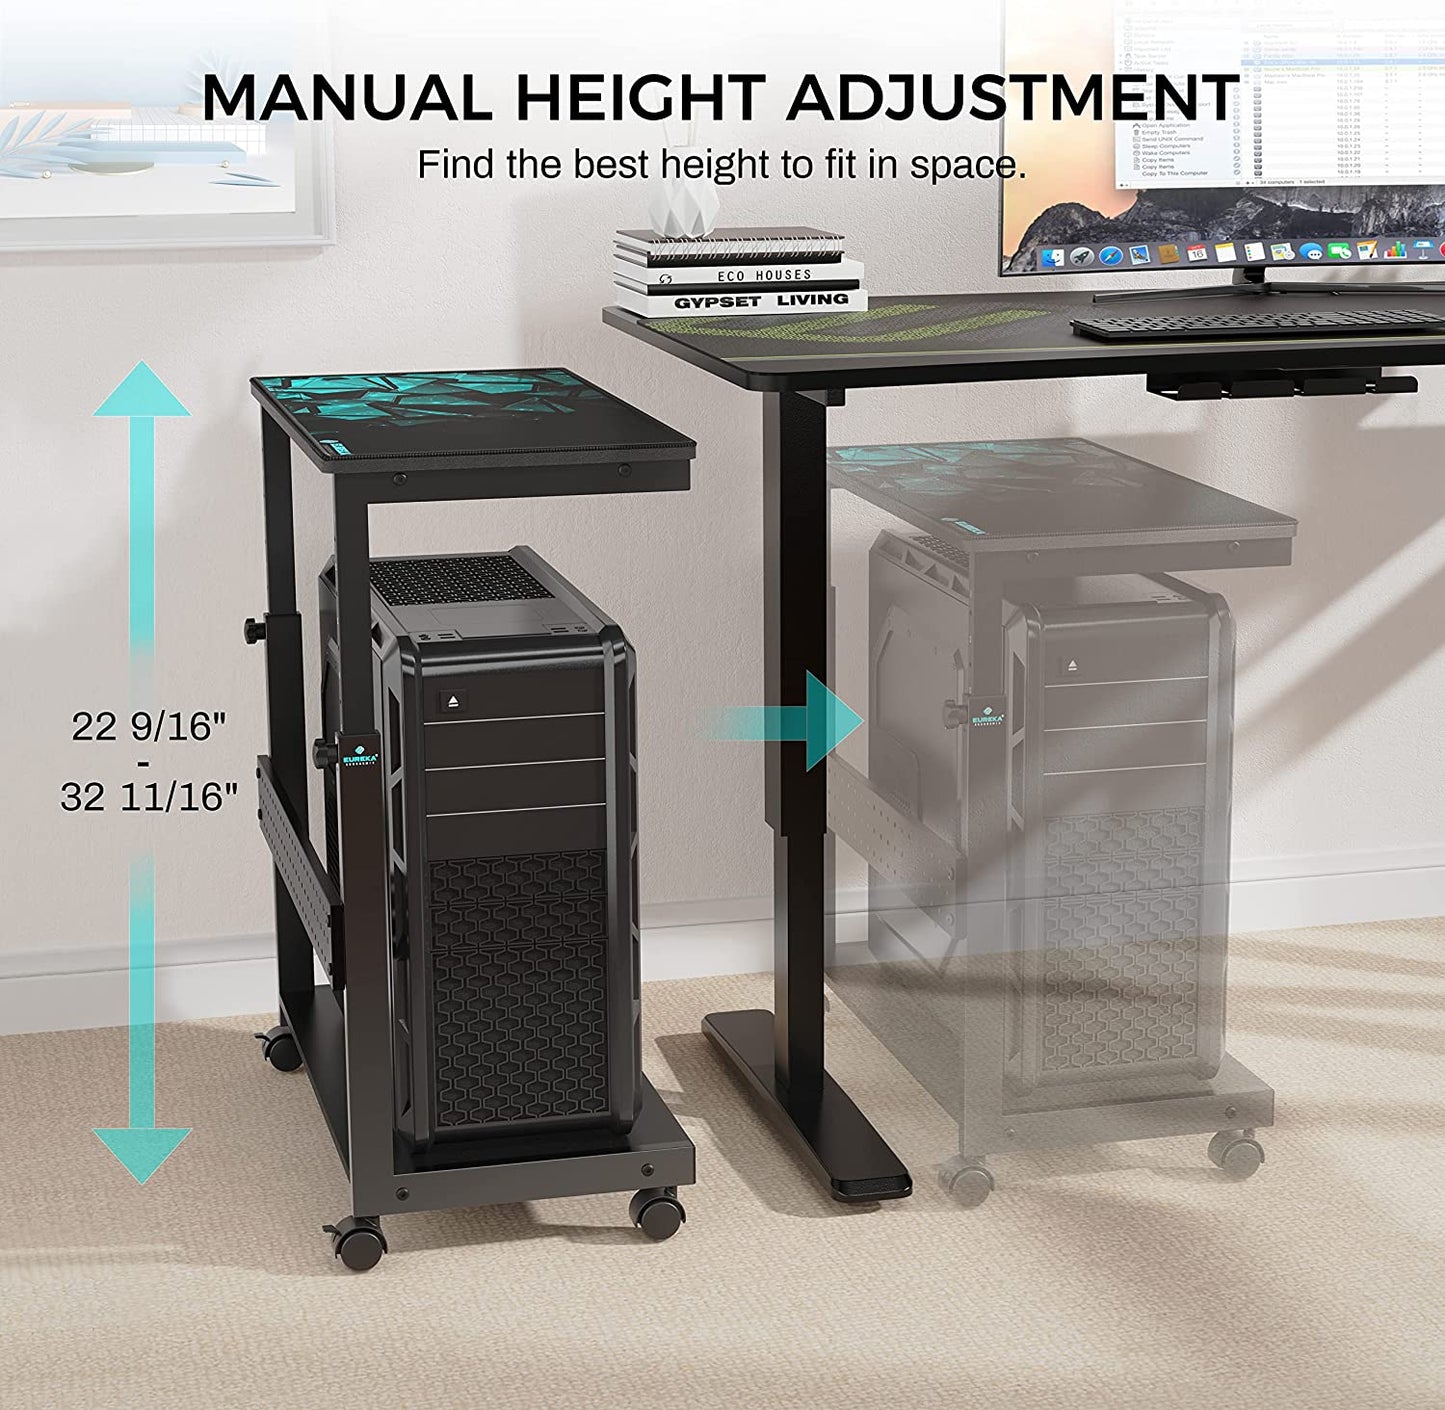 Height Adjustable Computer Tower Stand, 2-Tier Atx-Case CPU Holder Cart under Desk Mobile PC Laptop Standing Table Home Office Gaming Accessories W/Rolling Wheels & Mouse Pad, Black